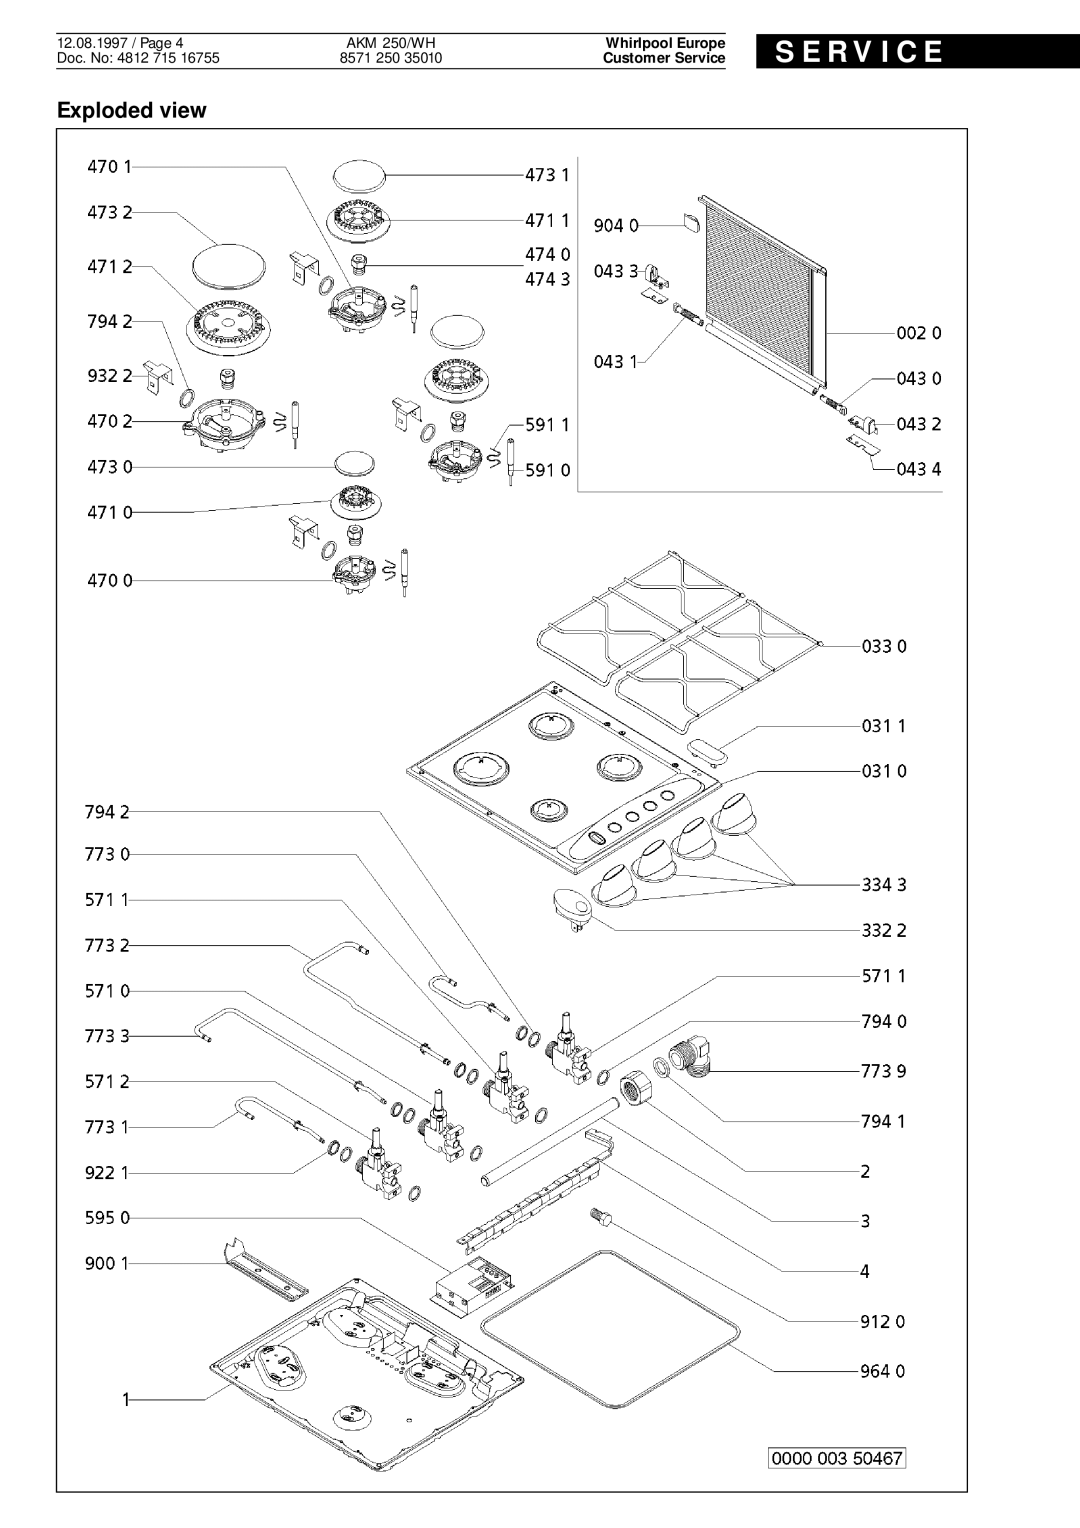 Whirlpool AKM 250 WH service manual Exploded view, S E R V I C E, Whirlpool Europe, Customer Service 